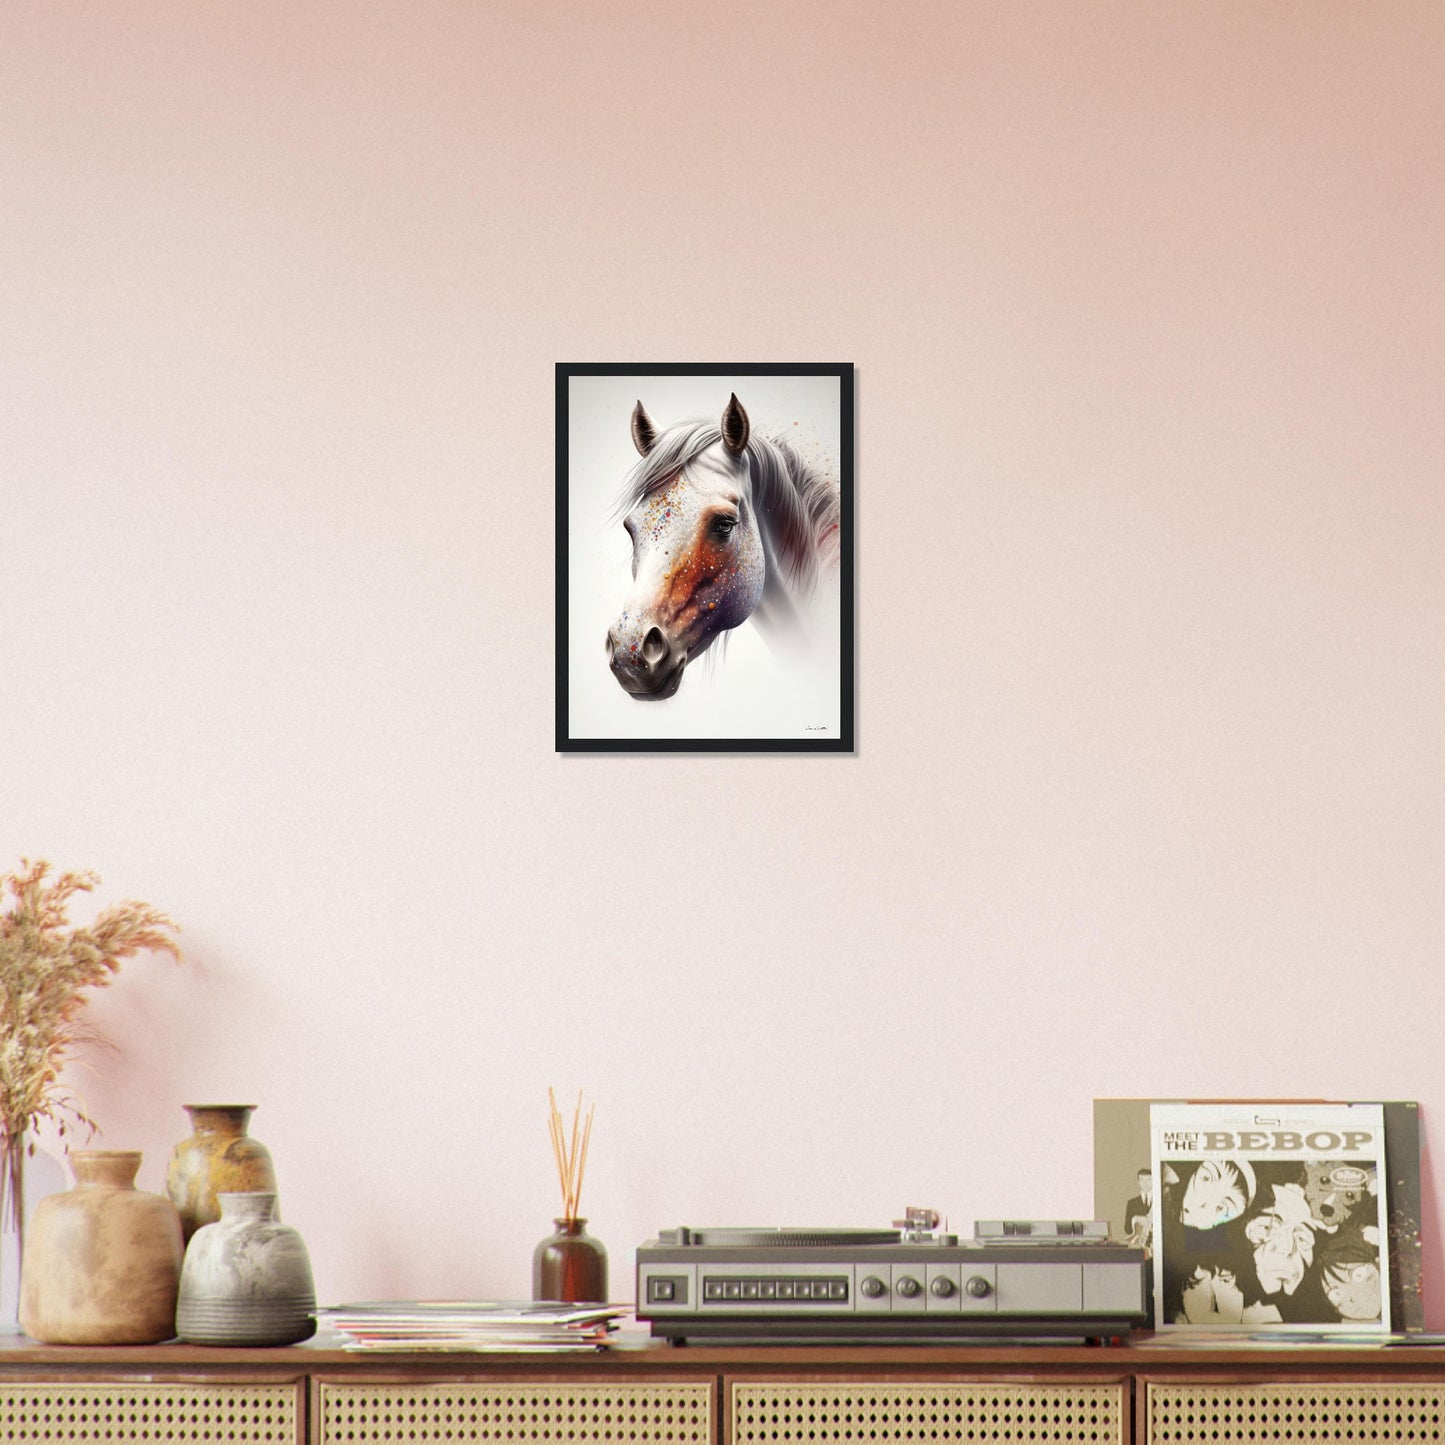 Shiny and Peaceful Fantasy Horse - Wood Framed Poster